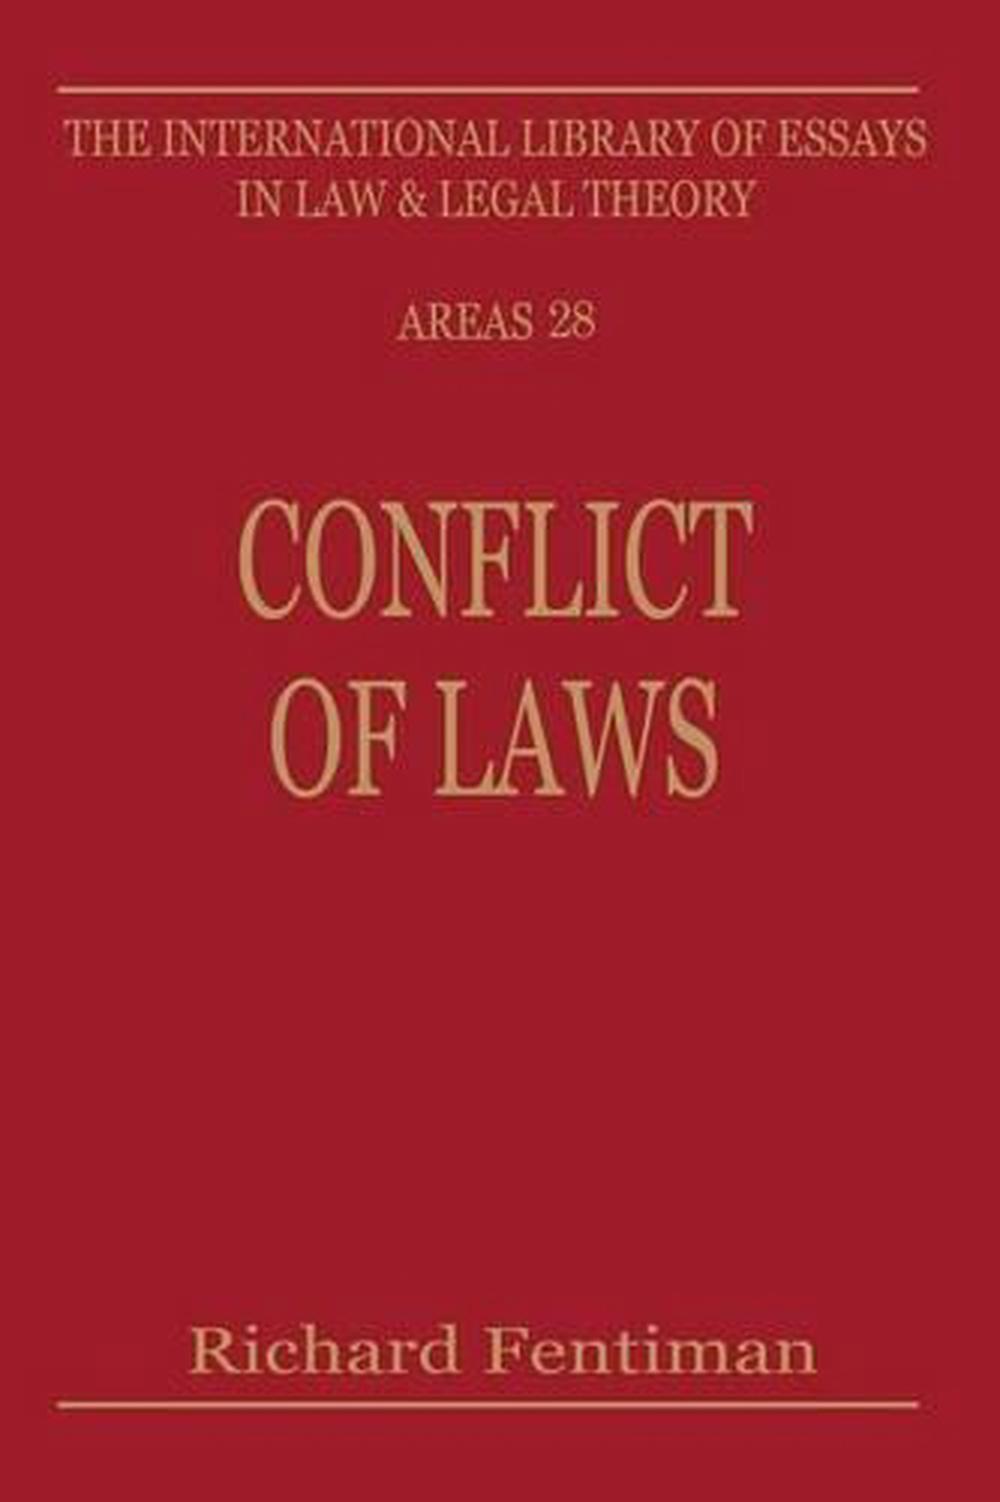 the oxford handbook of international law in armed conflict pdf